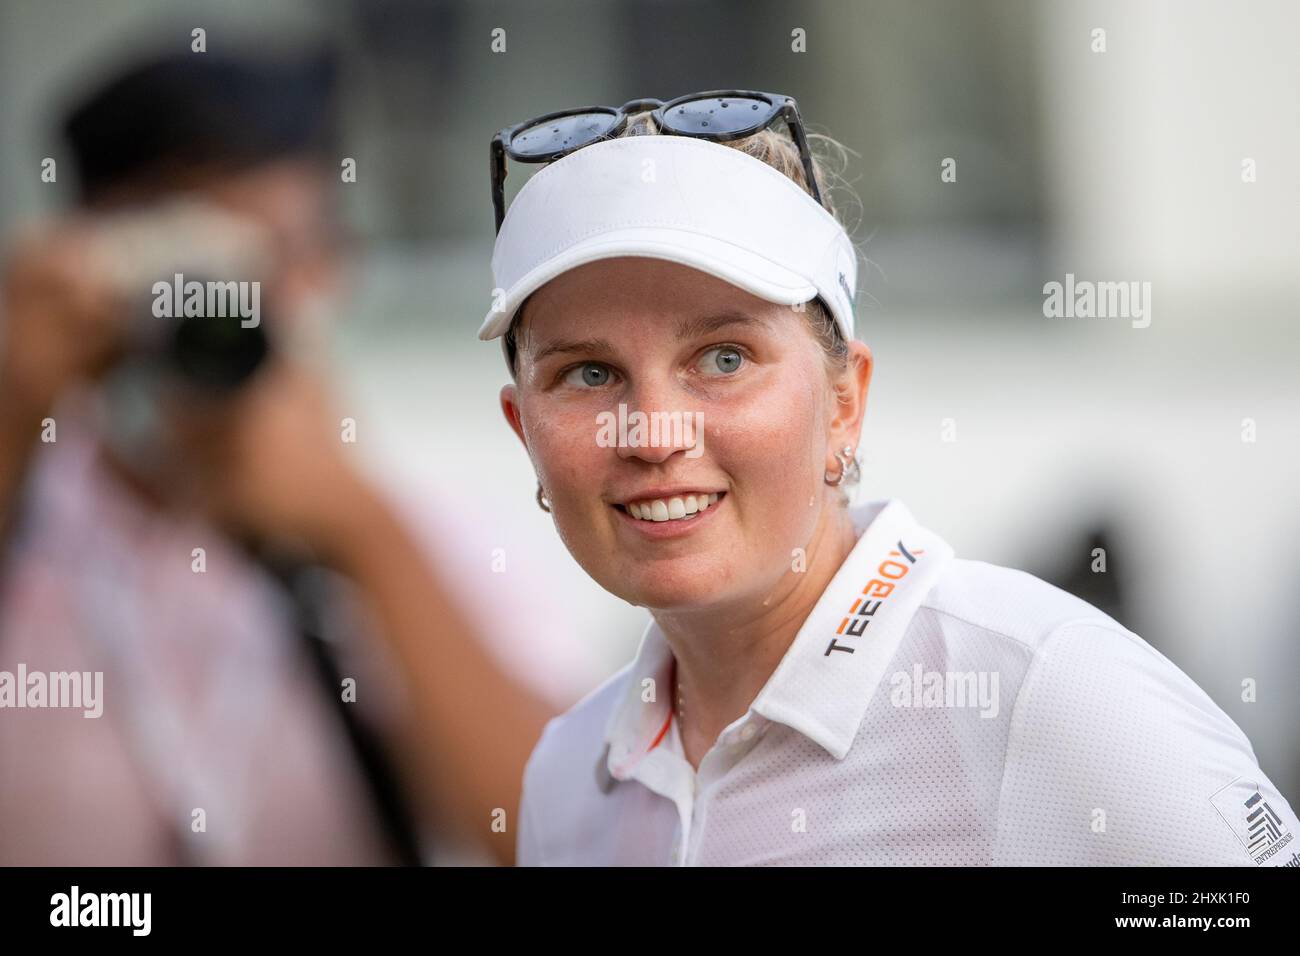 Pattaya Thailand - March 13:  Nanna Koerstz Madsen from Denmark is the tournament winner on the 4th and final day of The Honda LPGA Thailand at Siam Country Club Old Course on March 13, 2022 in Pattaya, Thailand (Photo by Peter van der Klooster/Orange Pictures) Stock Photo